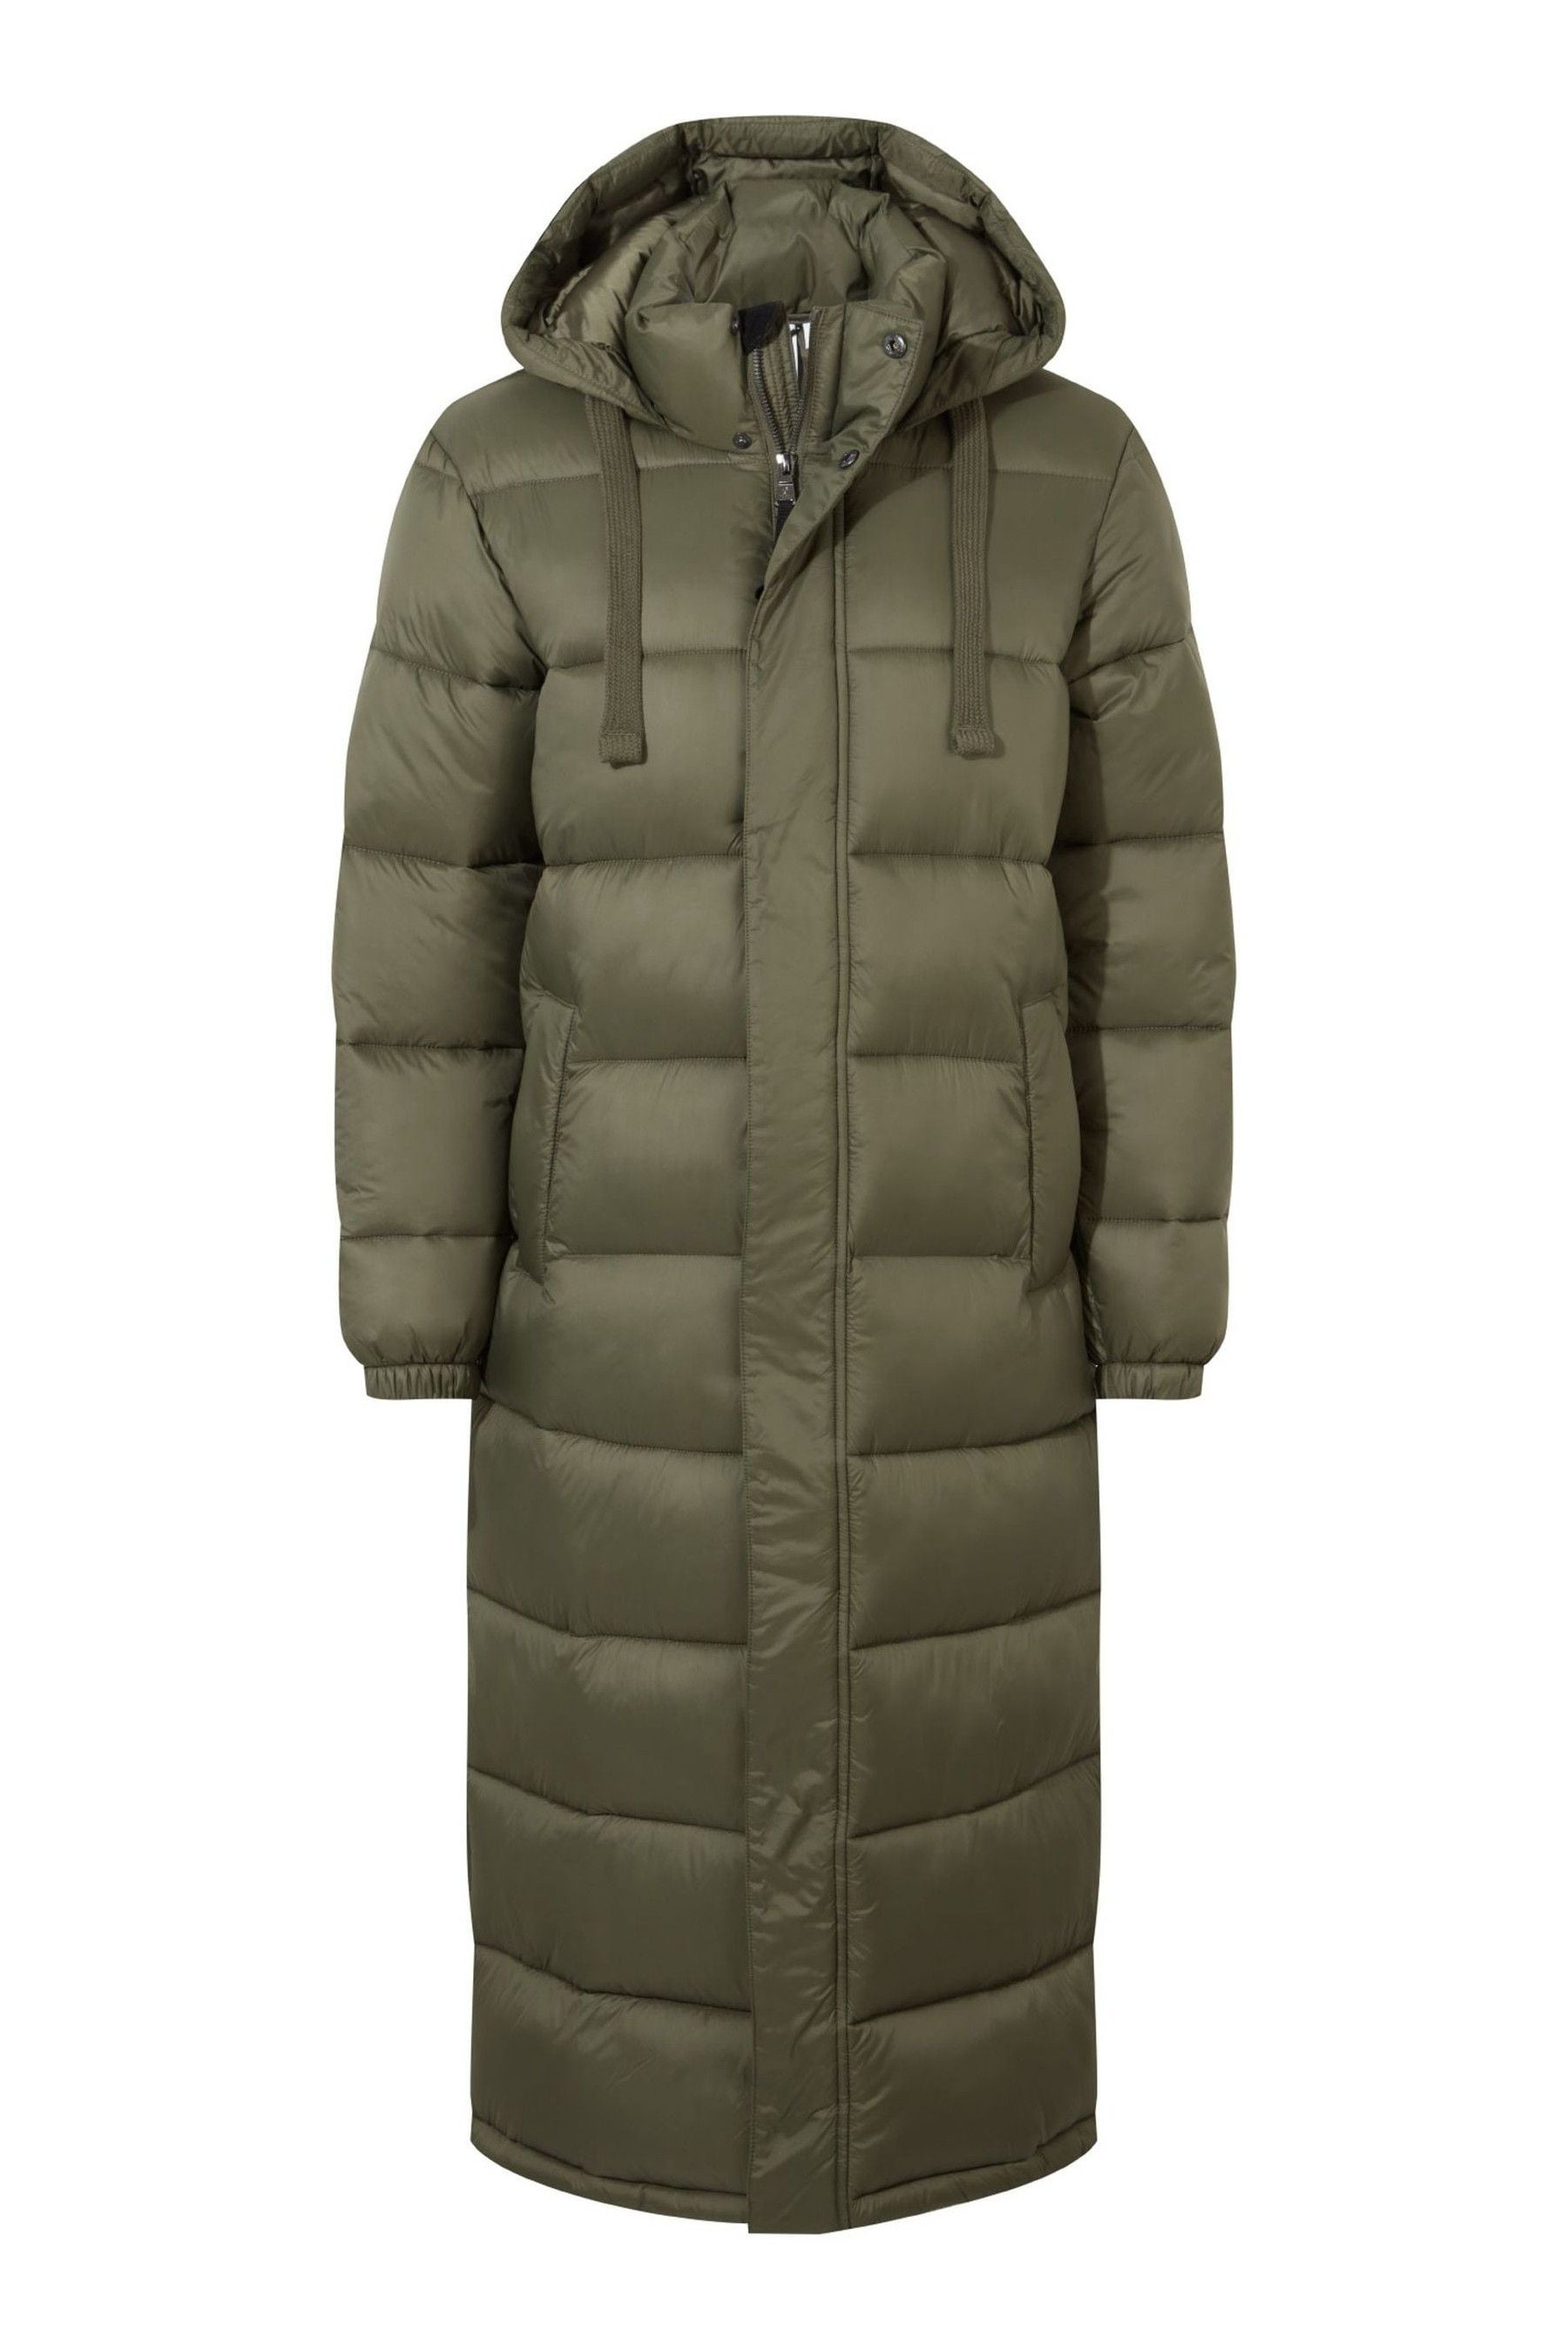 Buy Tog 24 Womens Cautley Long Padded Jacket from the Next UK online shop